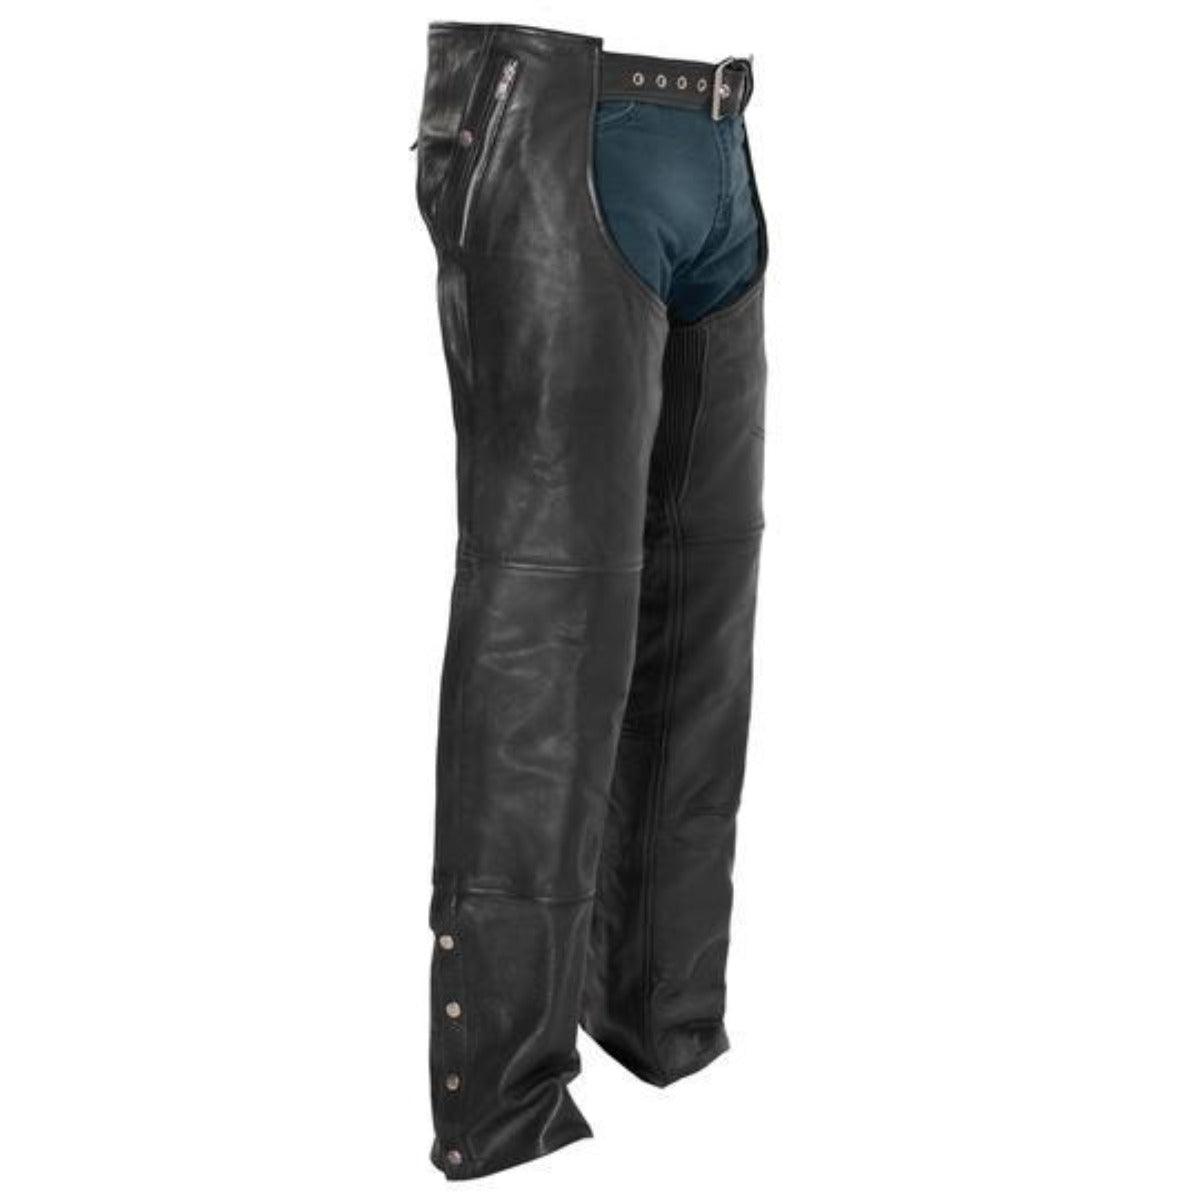 First Manufacturing Wind Walker - Unisex Motorcycle Leather Chaps - American Legend Rider